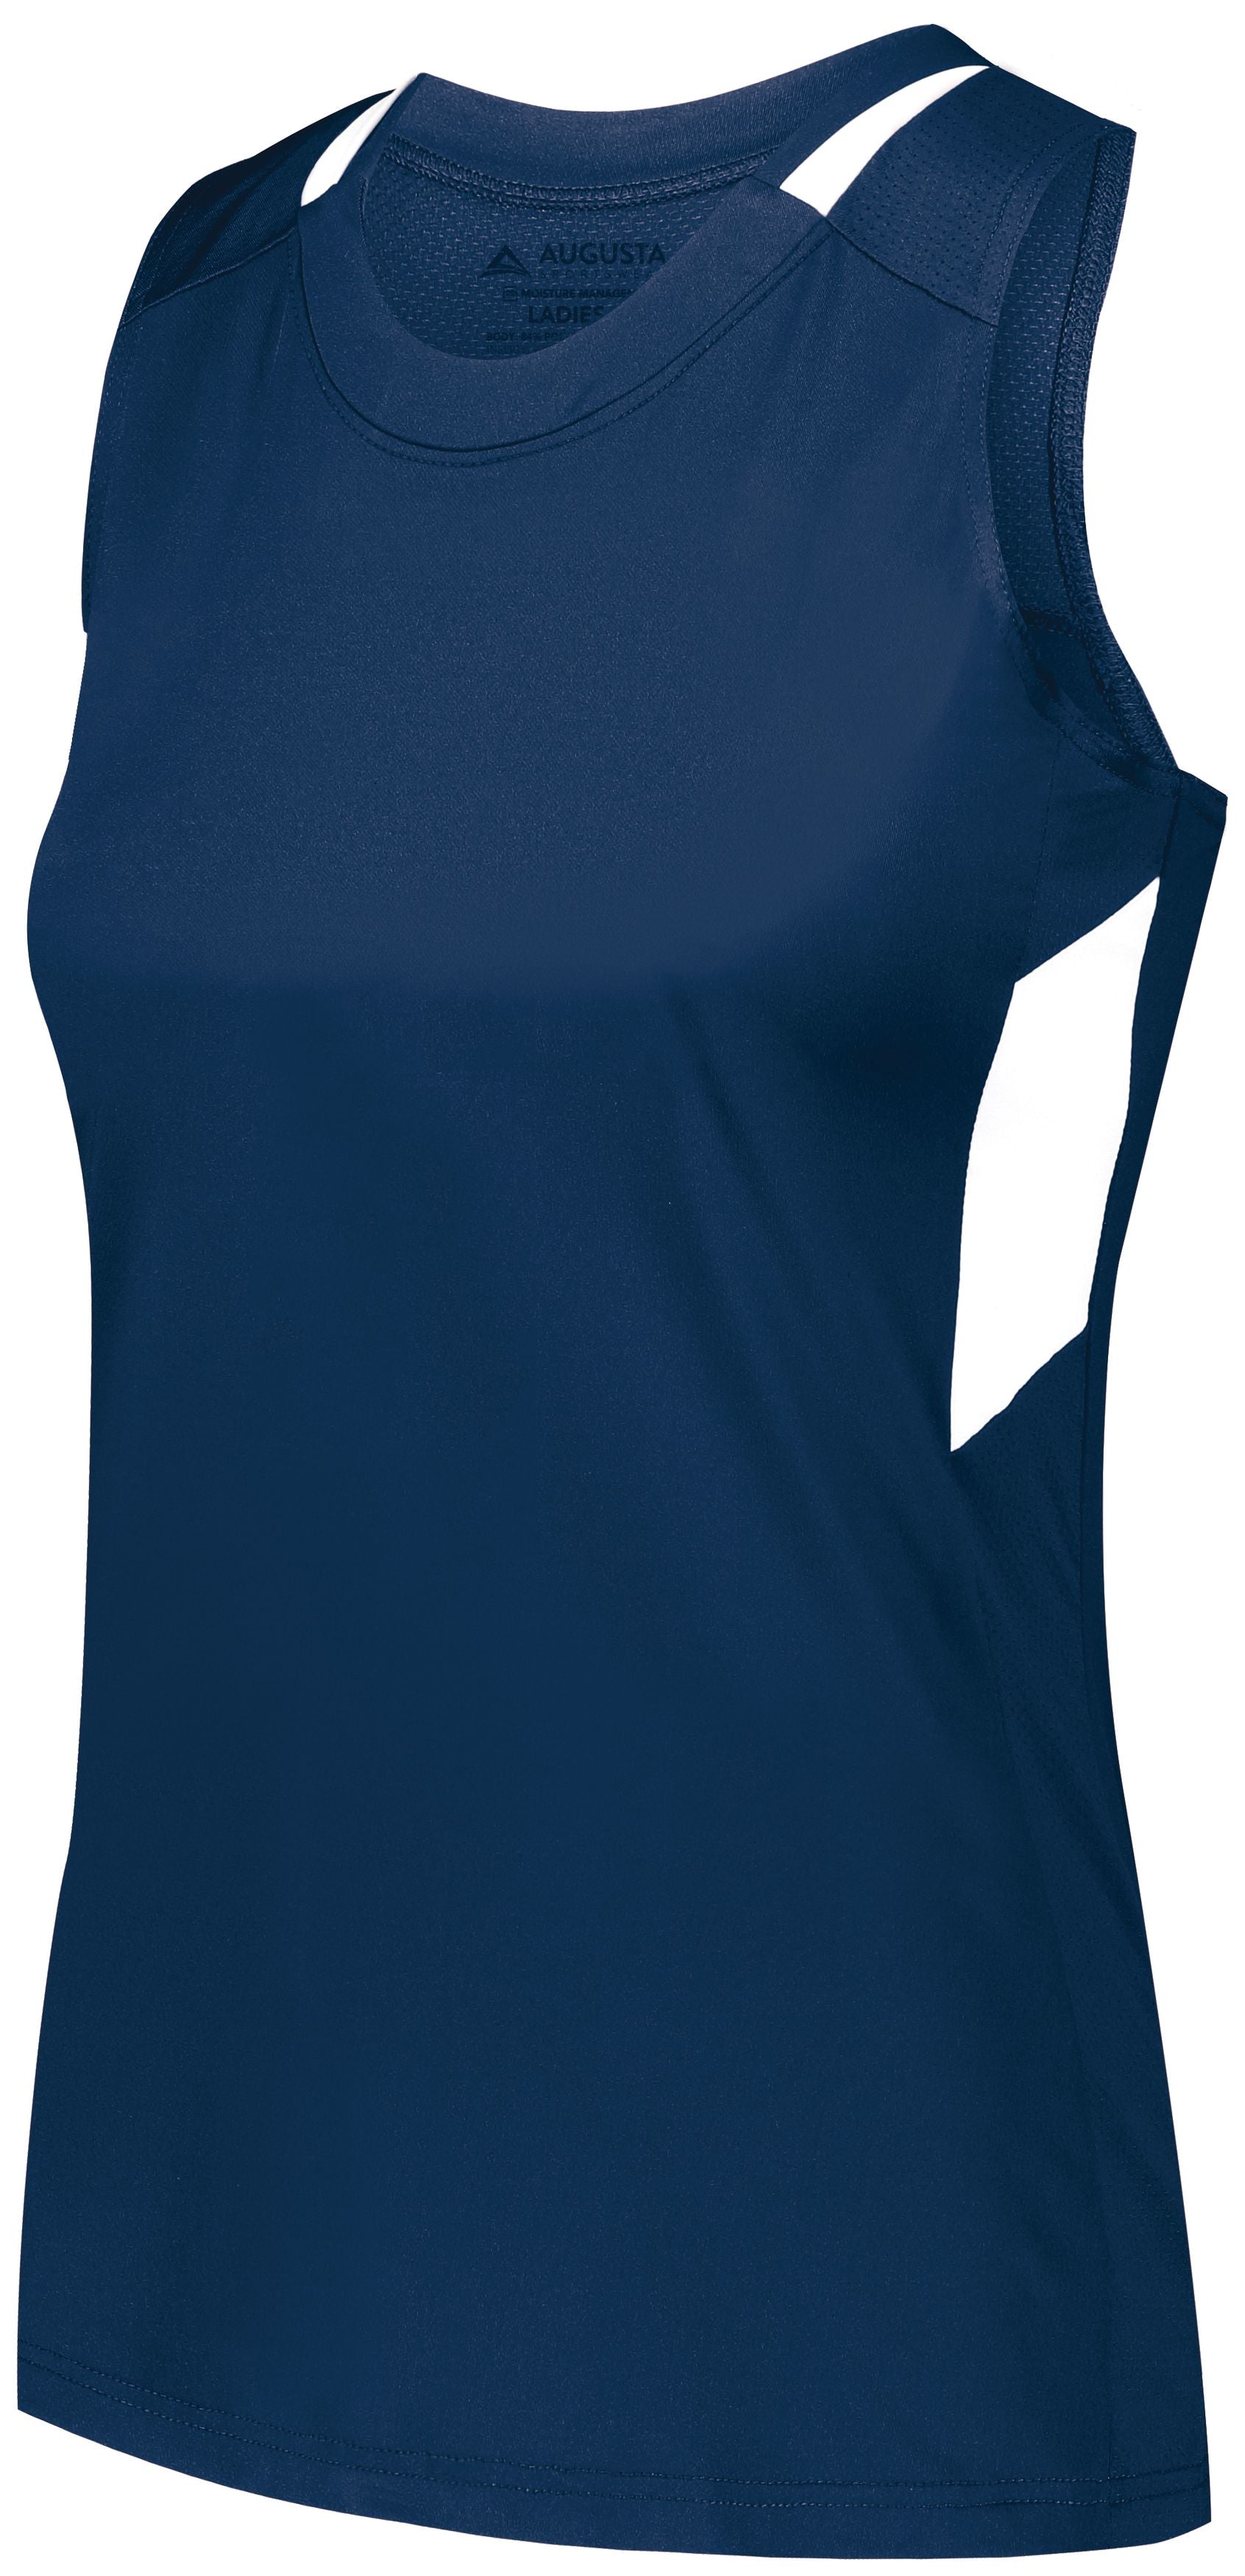 Augusta Sportswear Girls Crossover Tank in Navy/White  -Part of the Girls, Augusta-Products, Lacrosse, Girls-Tank, Shirts, All-Sports, All-Sports-1 product lines at KanaleyCreations.com